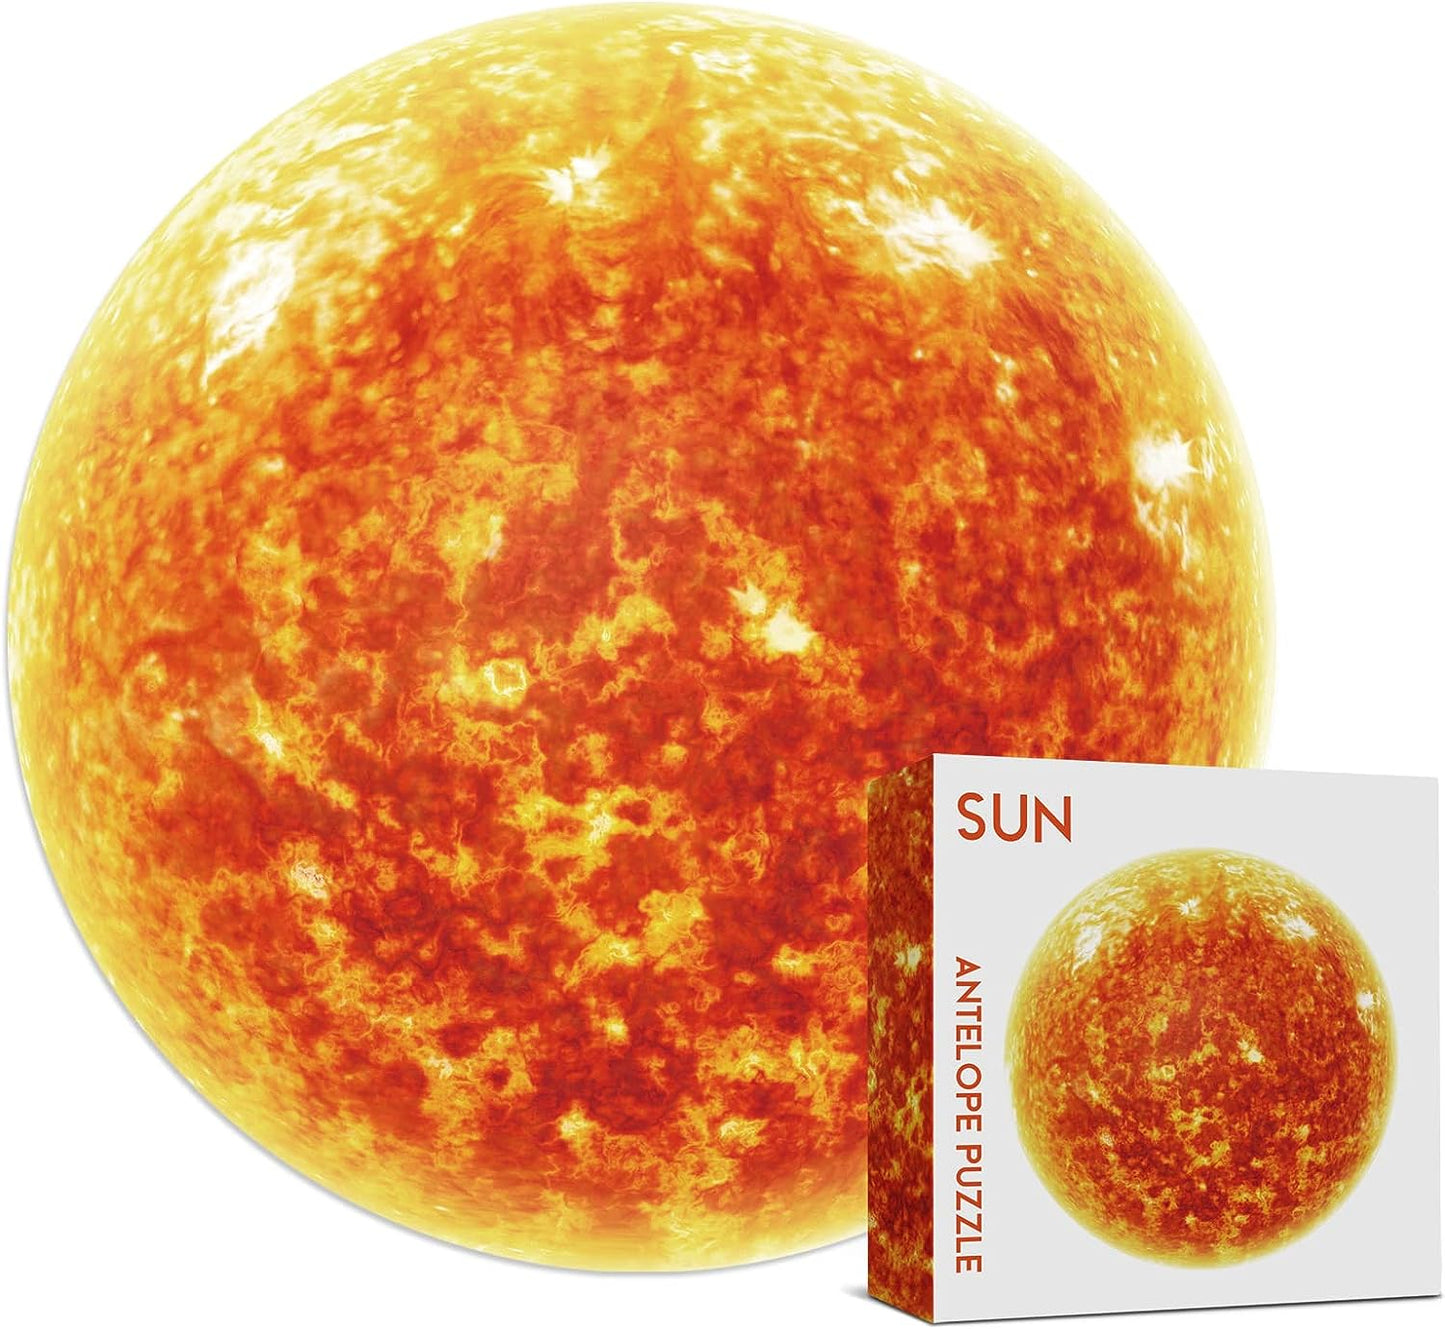 Antelope 3 in 1 1000 Piece Puzzle Bundle with Earth, Moon and Sun